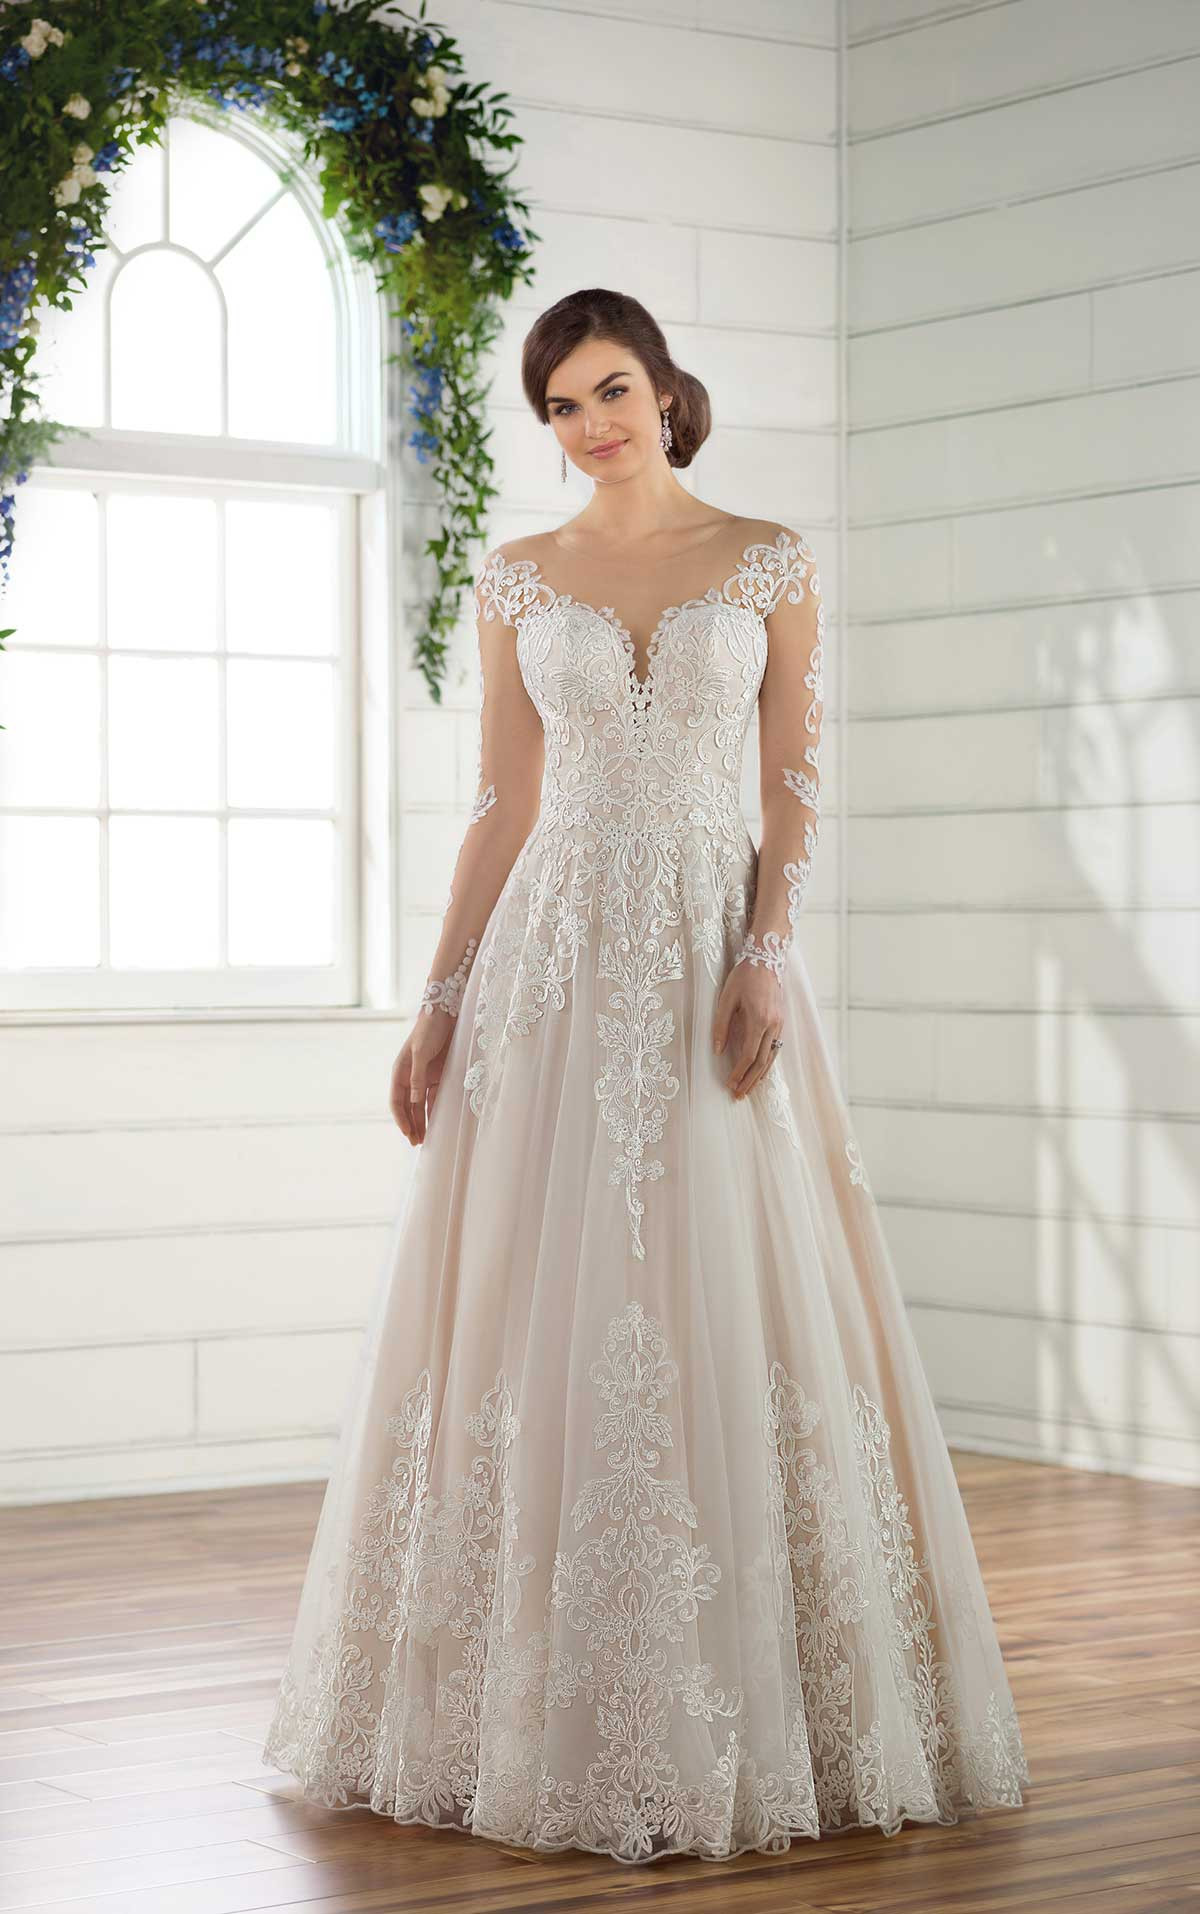 Wedding Dresses With Lace Sleeves
 Decadent Lace Sleeved Wedding Dress